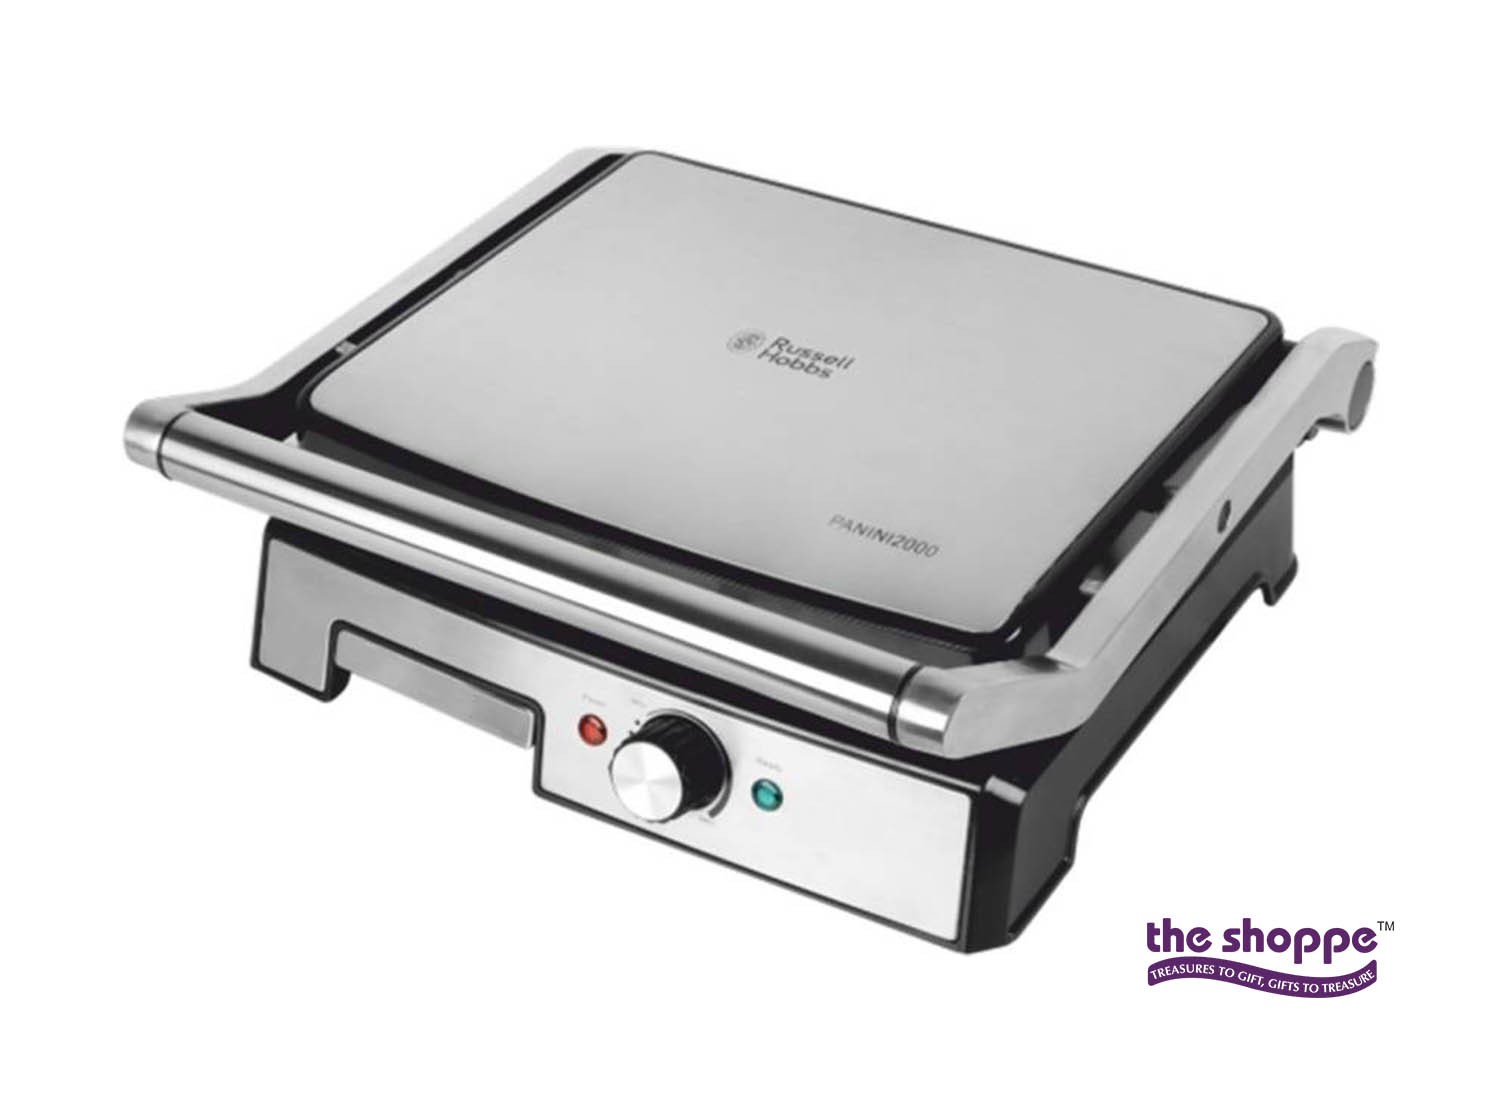 Lår væske undertrykkeren Russell Hobbs Panini Grill Grill (Silver) - Toasters and Sandwhich maker -  Electronics